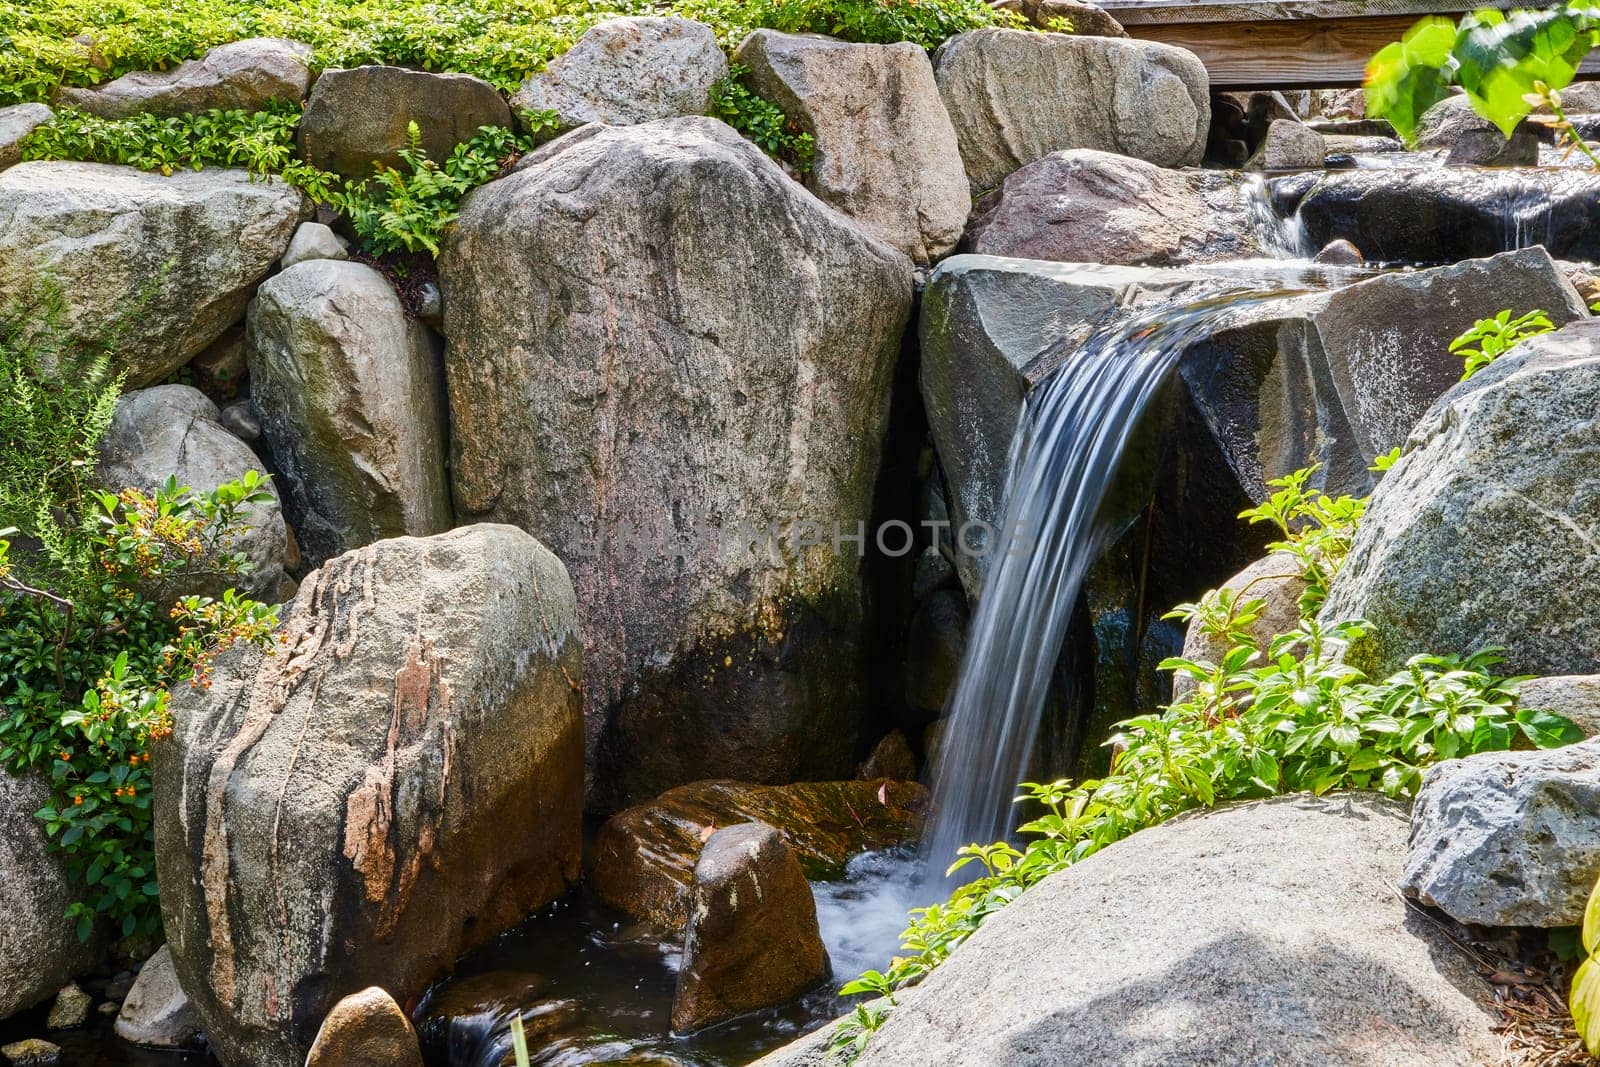 Tranquil Garden Waterfall with Lush Greenery and Boulders by njproductions